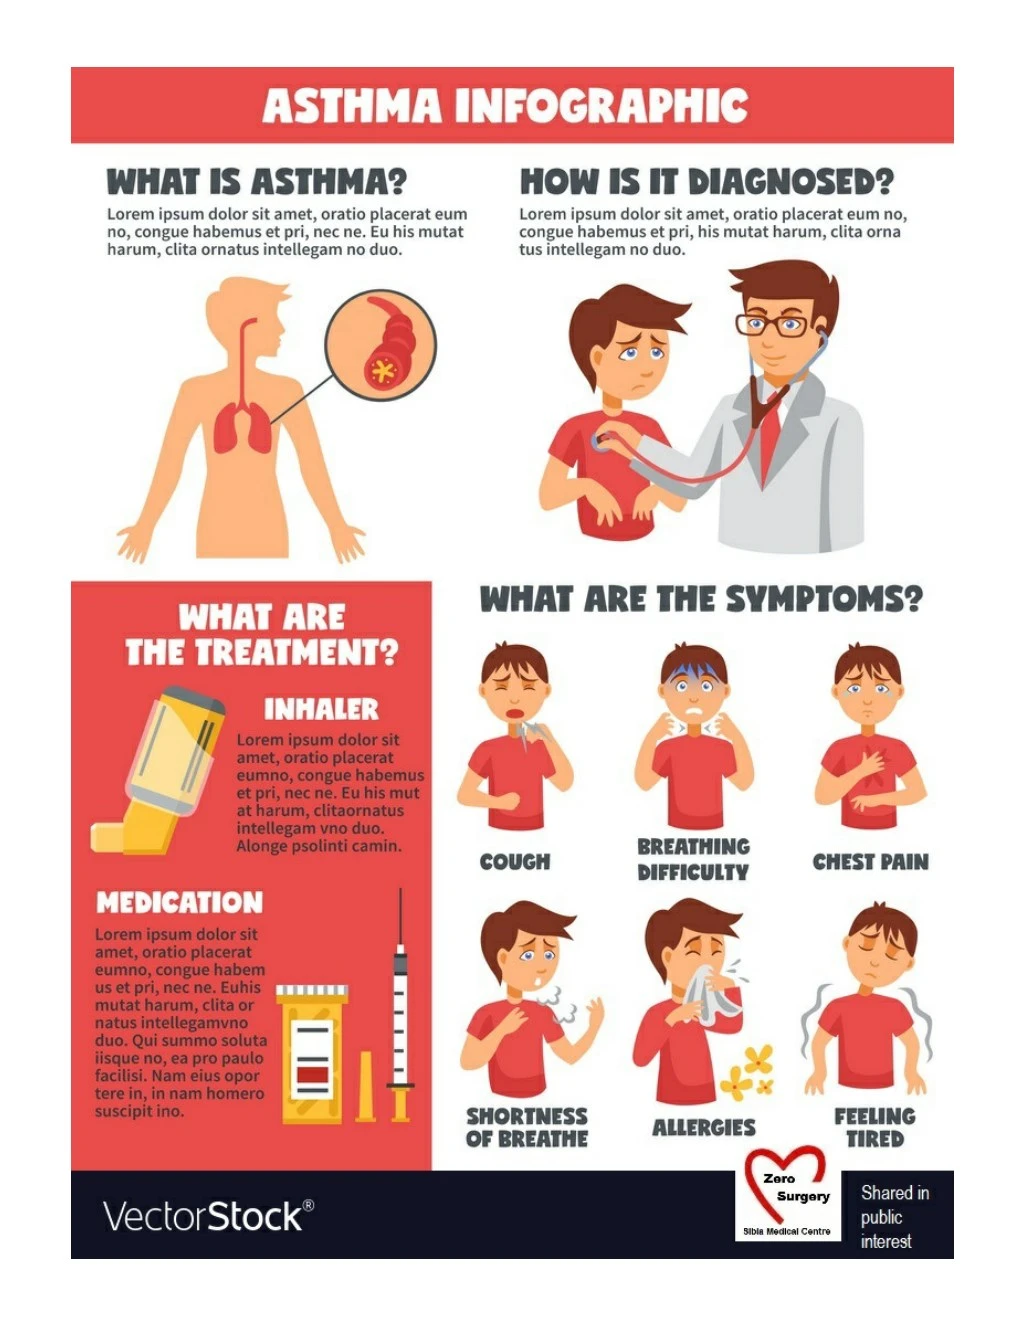 powerpoint presentation for asthma